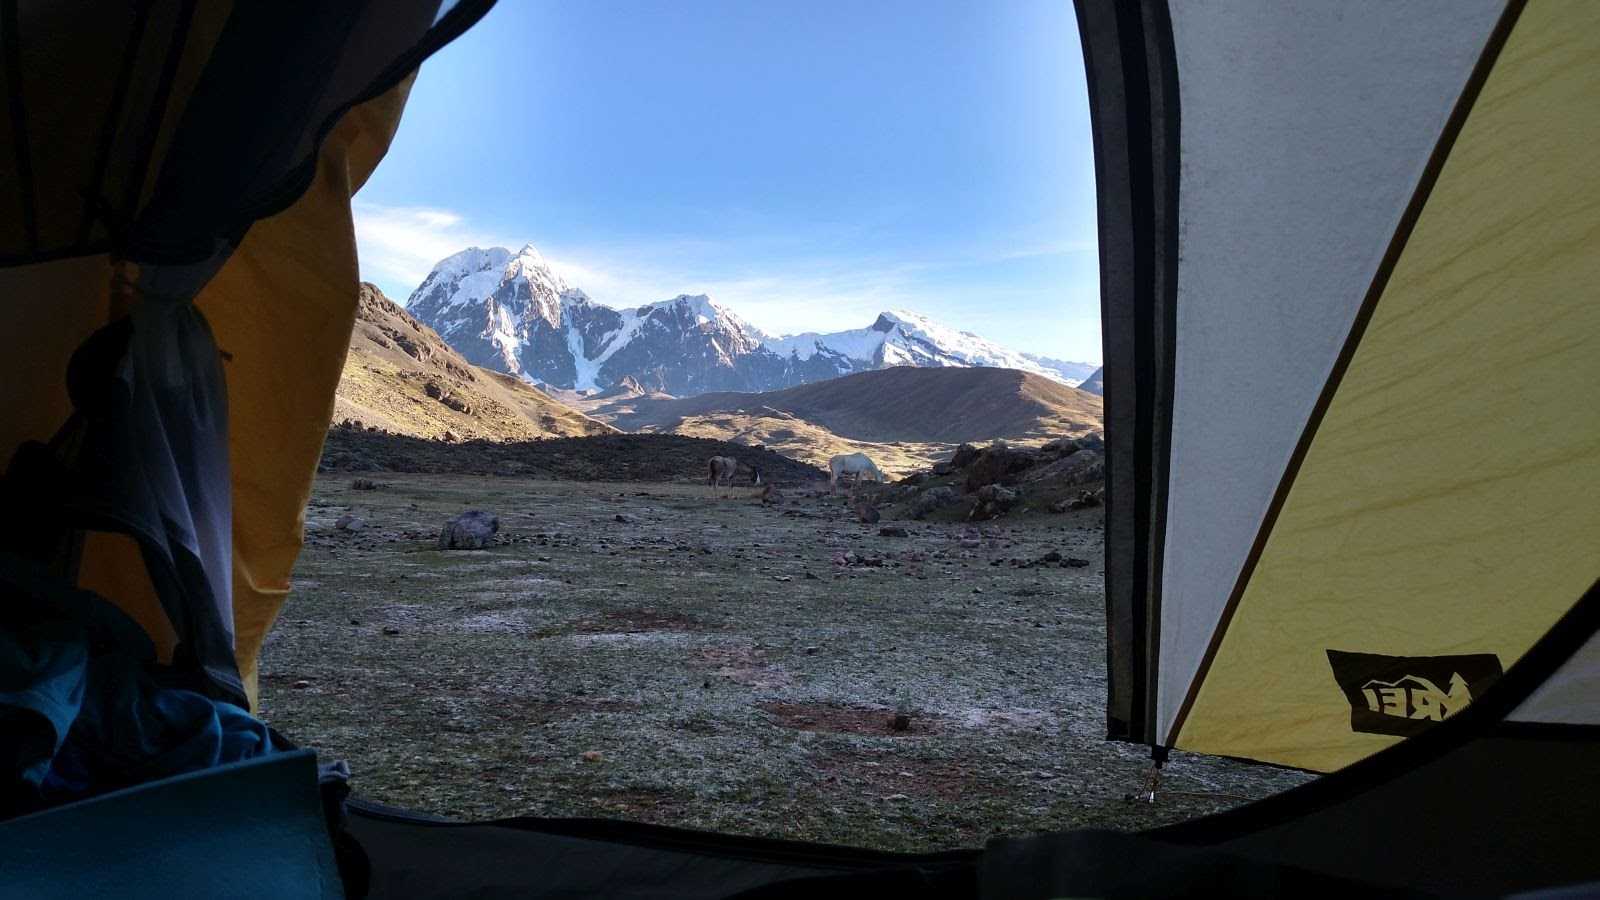 Dawning at the Huchuy Phinaya campsite with a backdrop of the three peaks